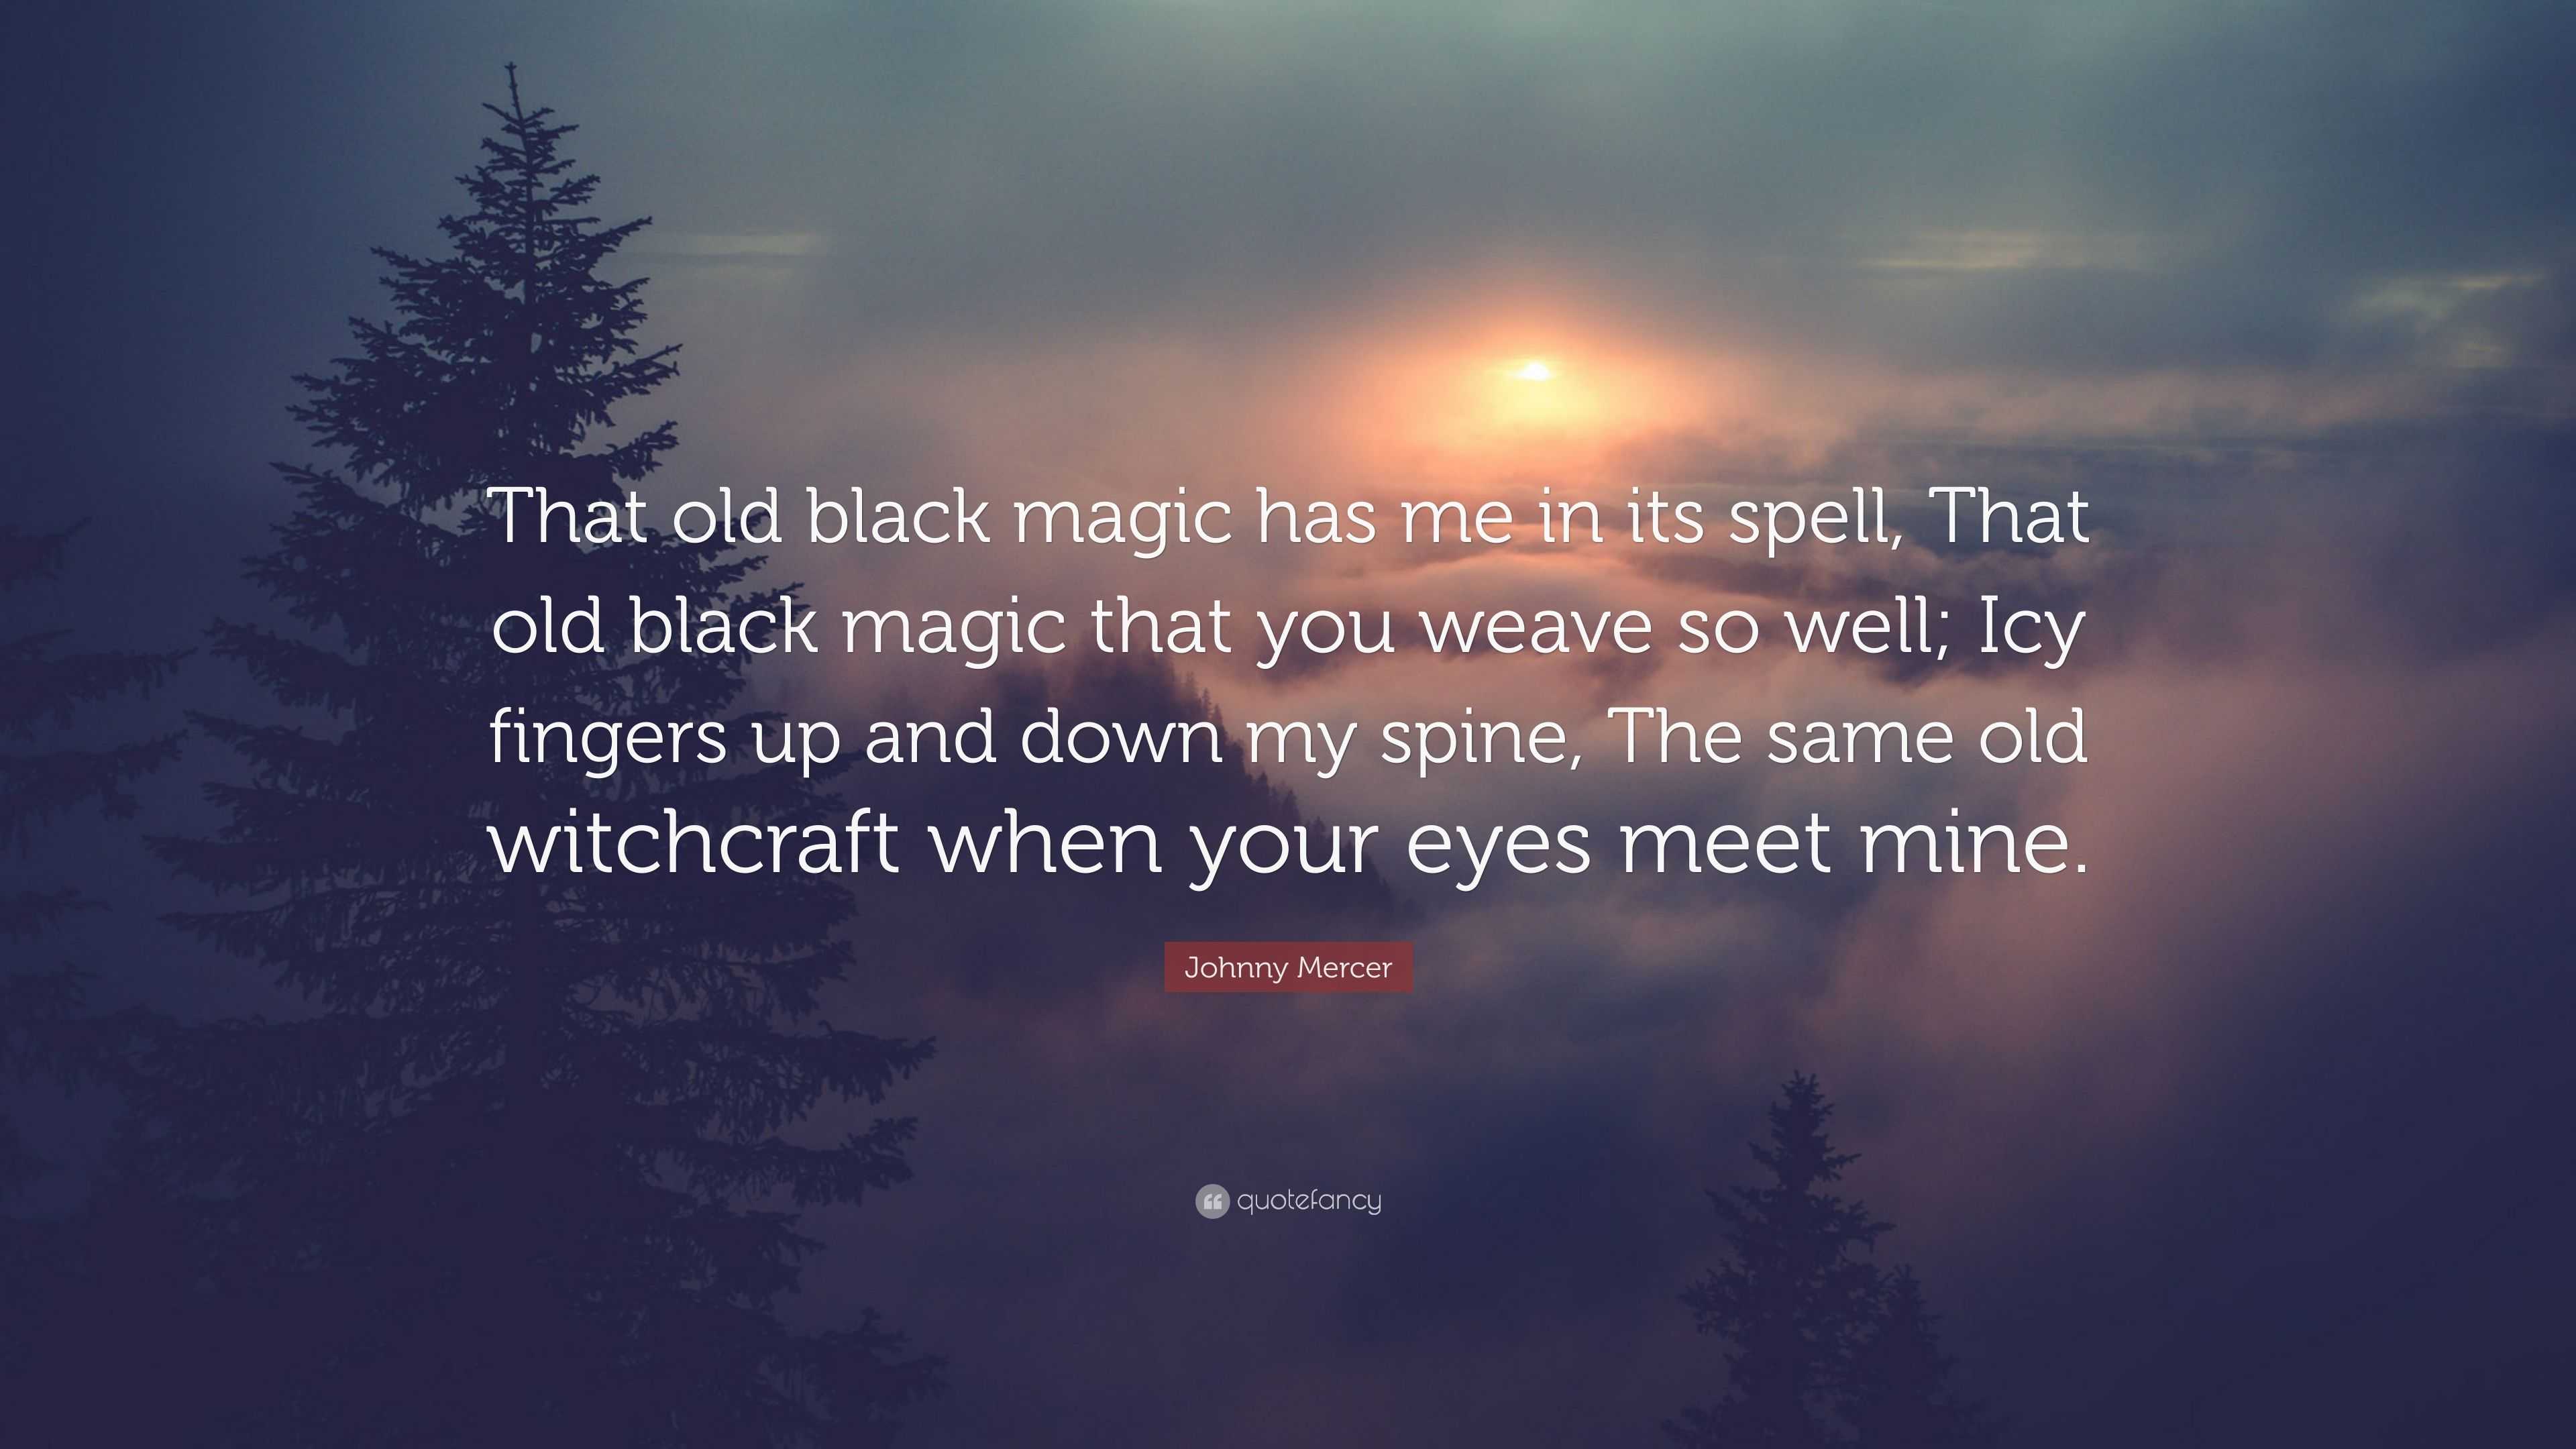 Johnny Mercer Quote: “That old black magic has me in its spell, That ...